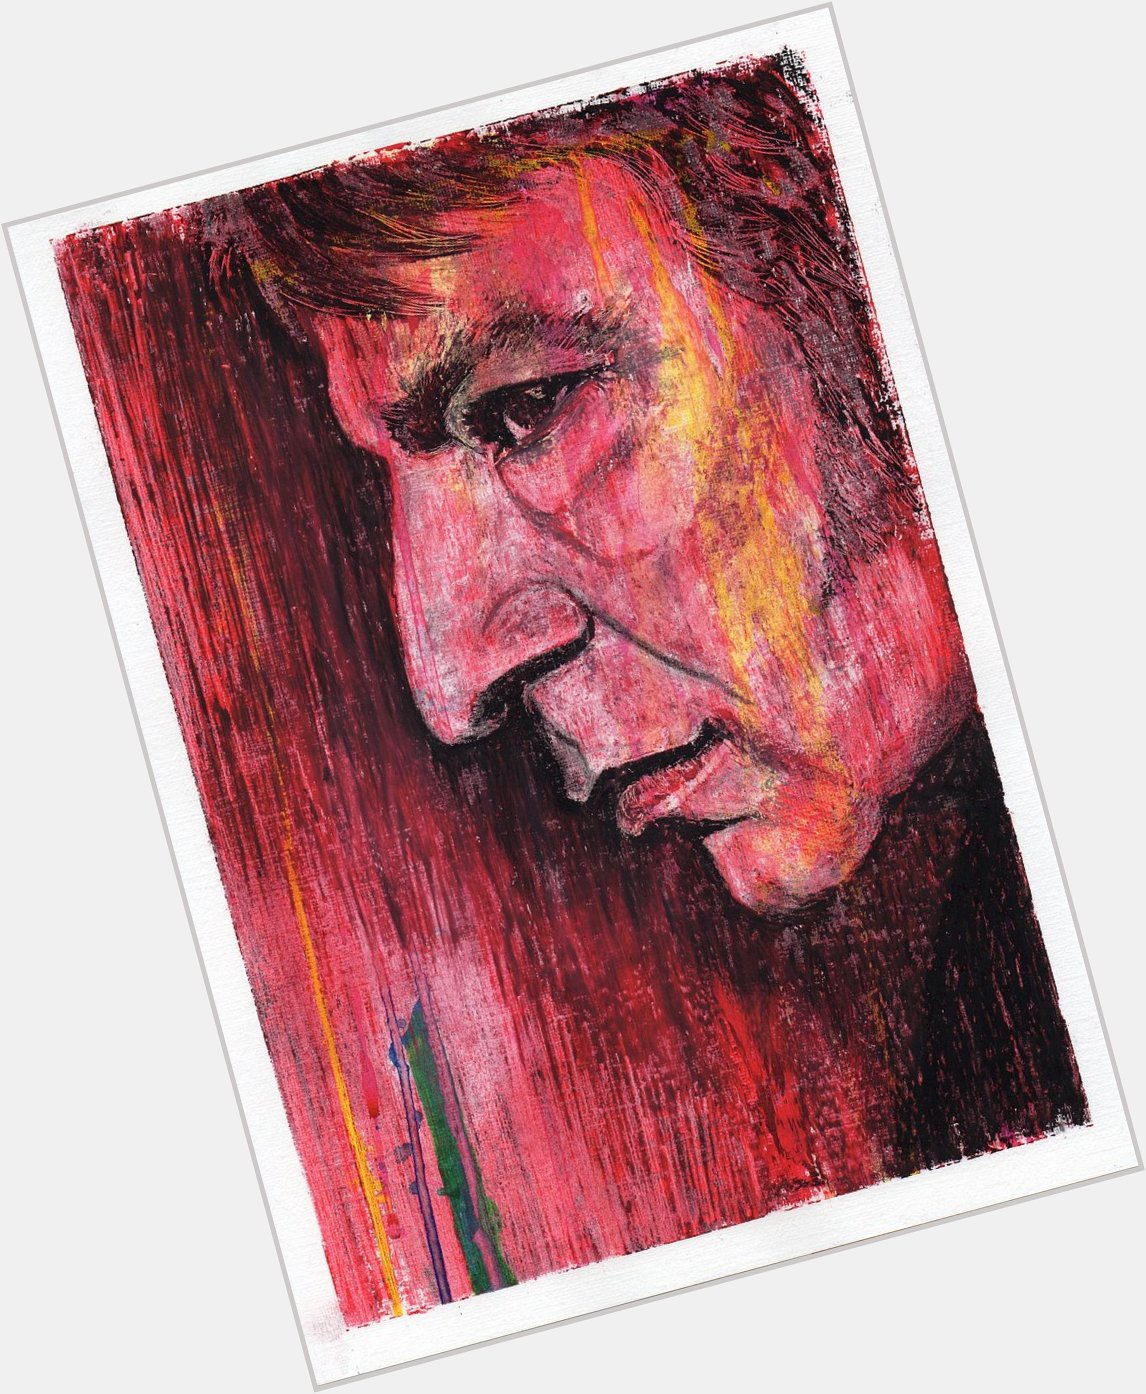 Happy birthday Alan Rickman, born on this day in 1946. This picture: oil and ink on acrylic paper, 21cm x 30cm. 